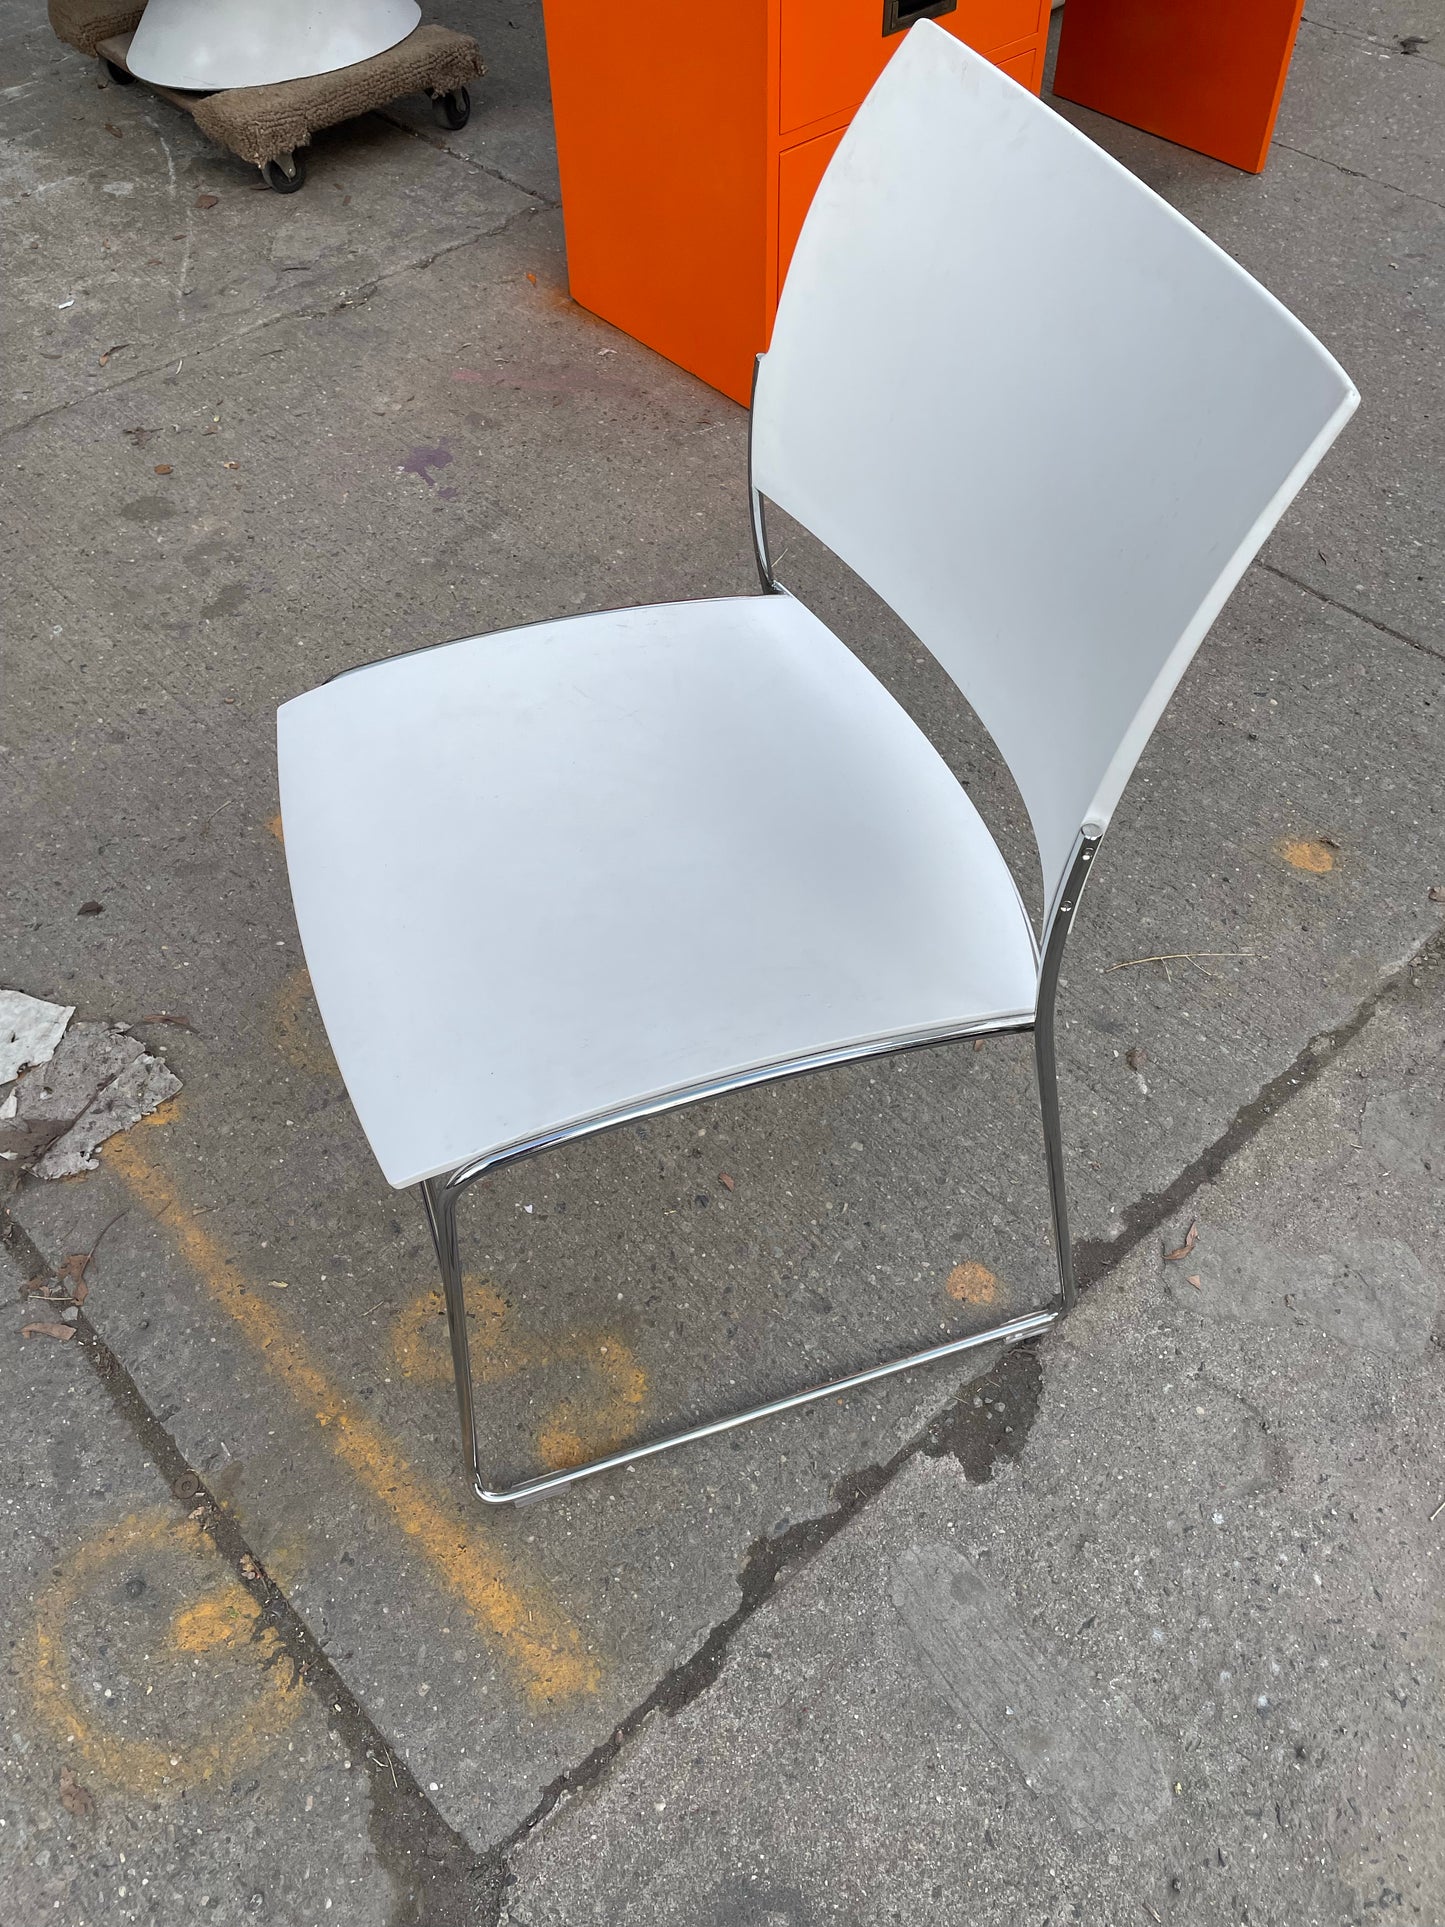 Poppins White and Chrome Single Desk Chair